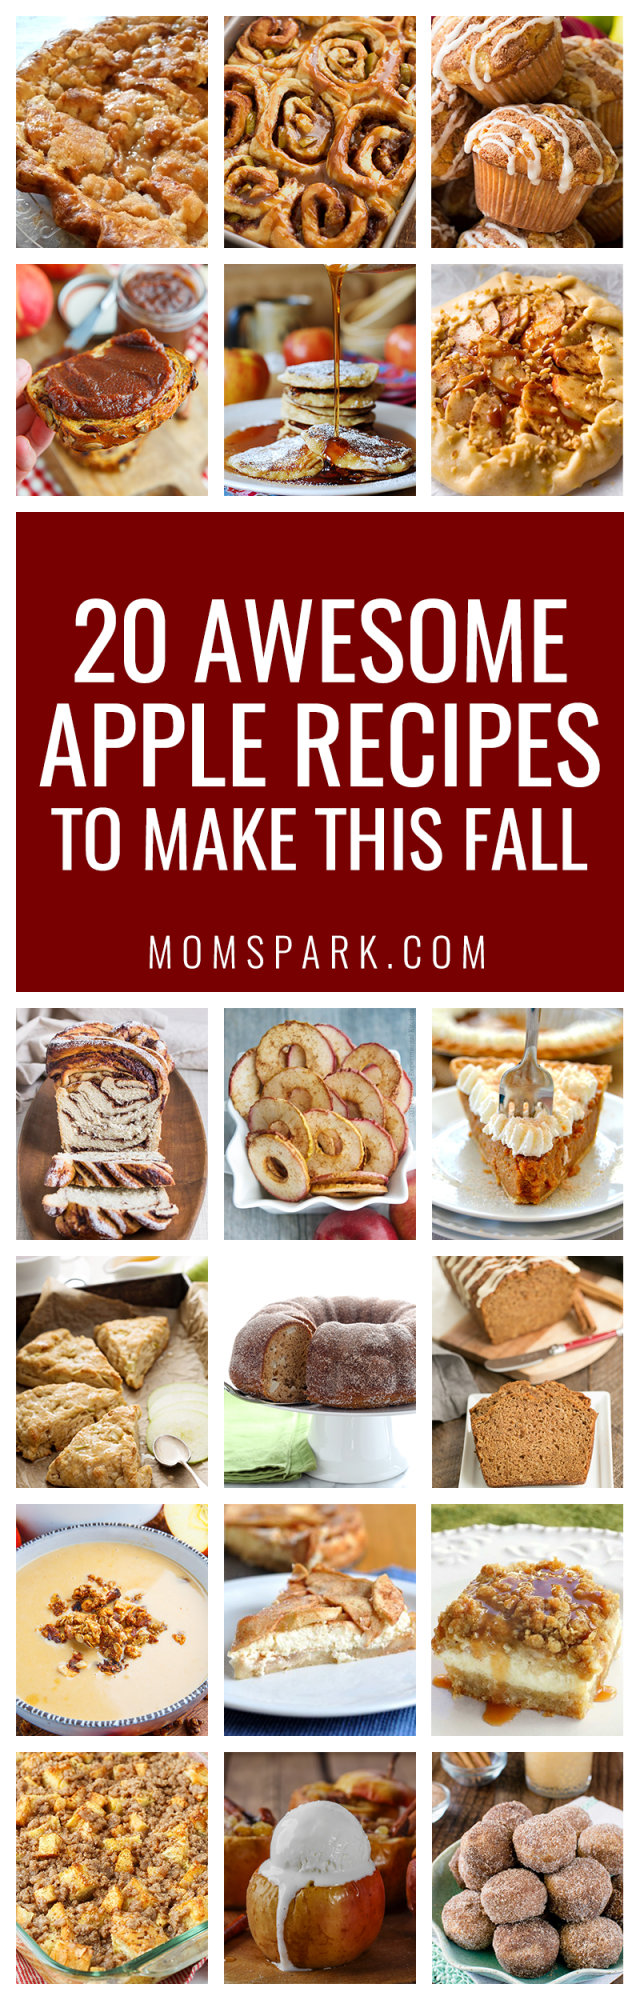 It's officially apple-picking season. Here are 20 awesome apple recipes to make this fall with all of your apples!